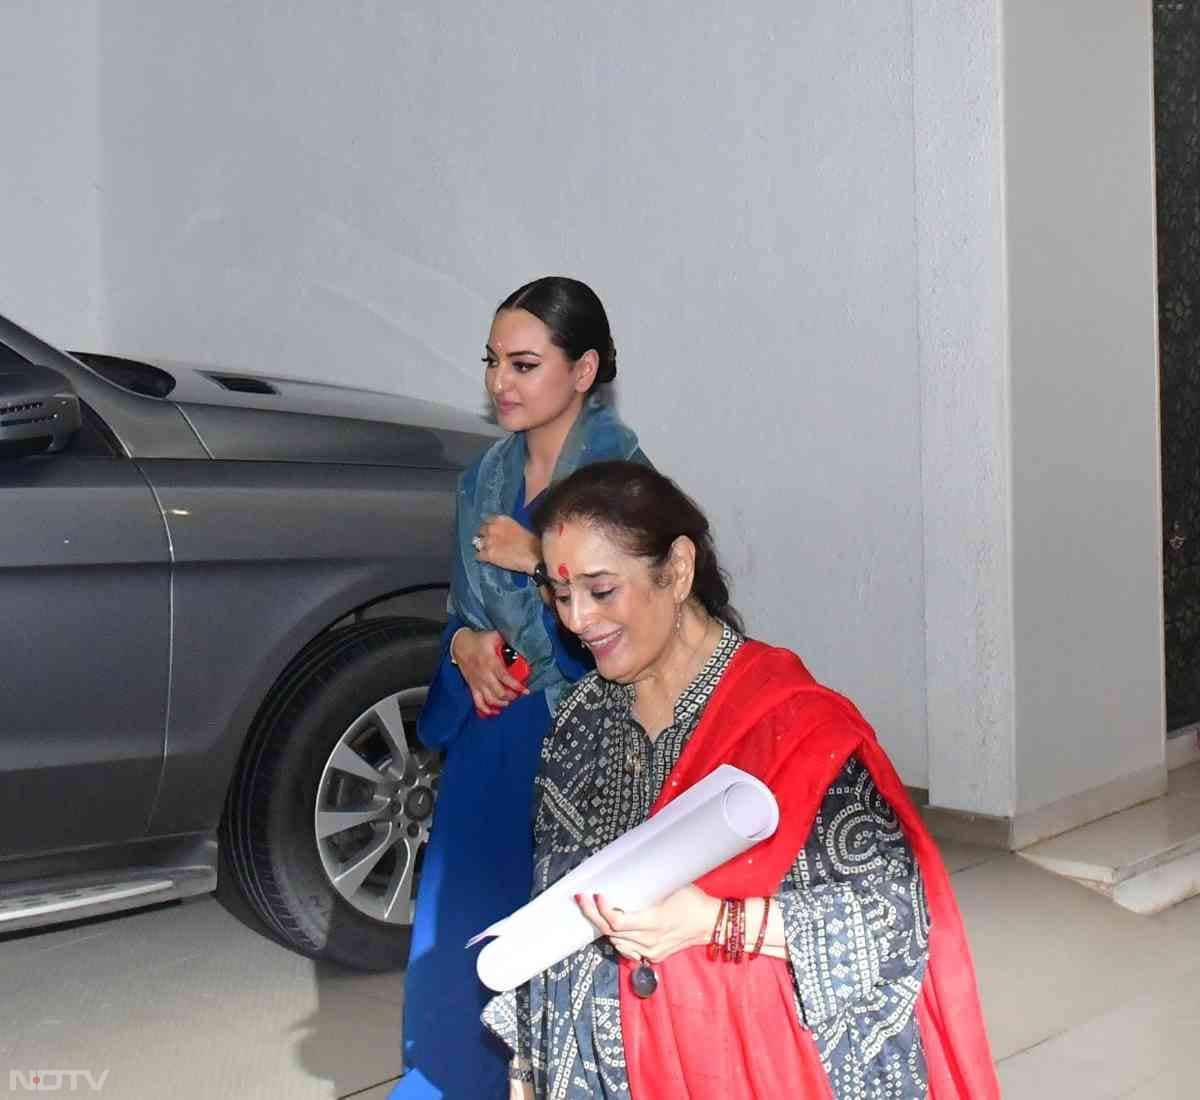 Bride-To-Be Sonakshi Sinha Paints The Town Blue Ahead Of Her Wedding